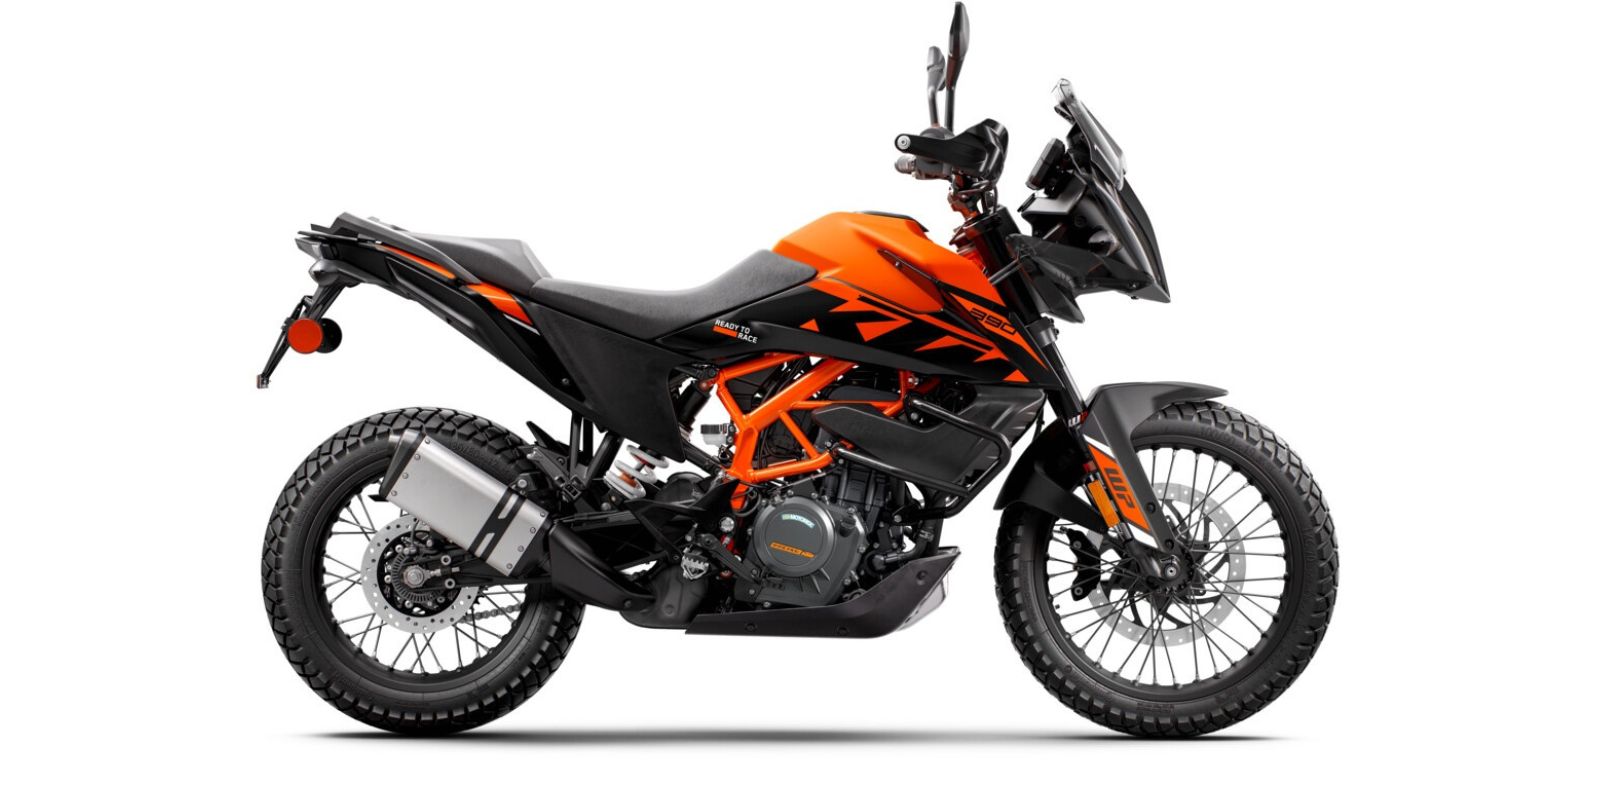 KTM 390 Adventure with spoked wheels